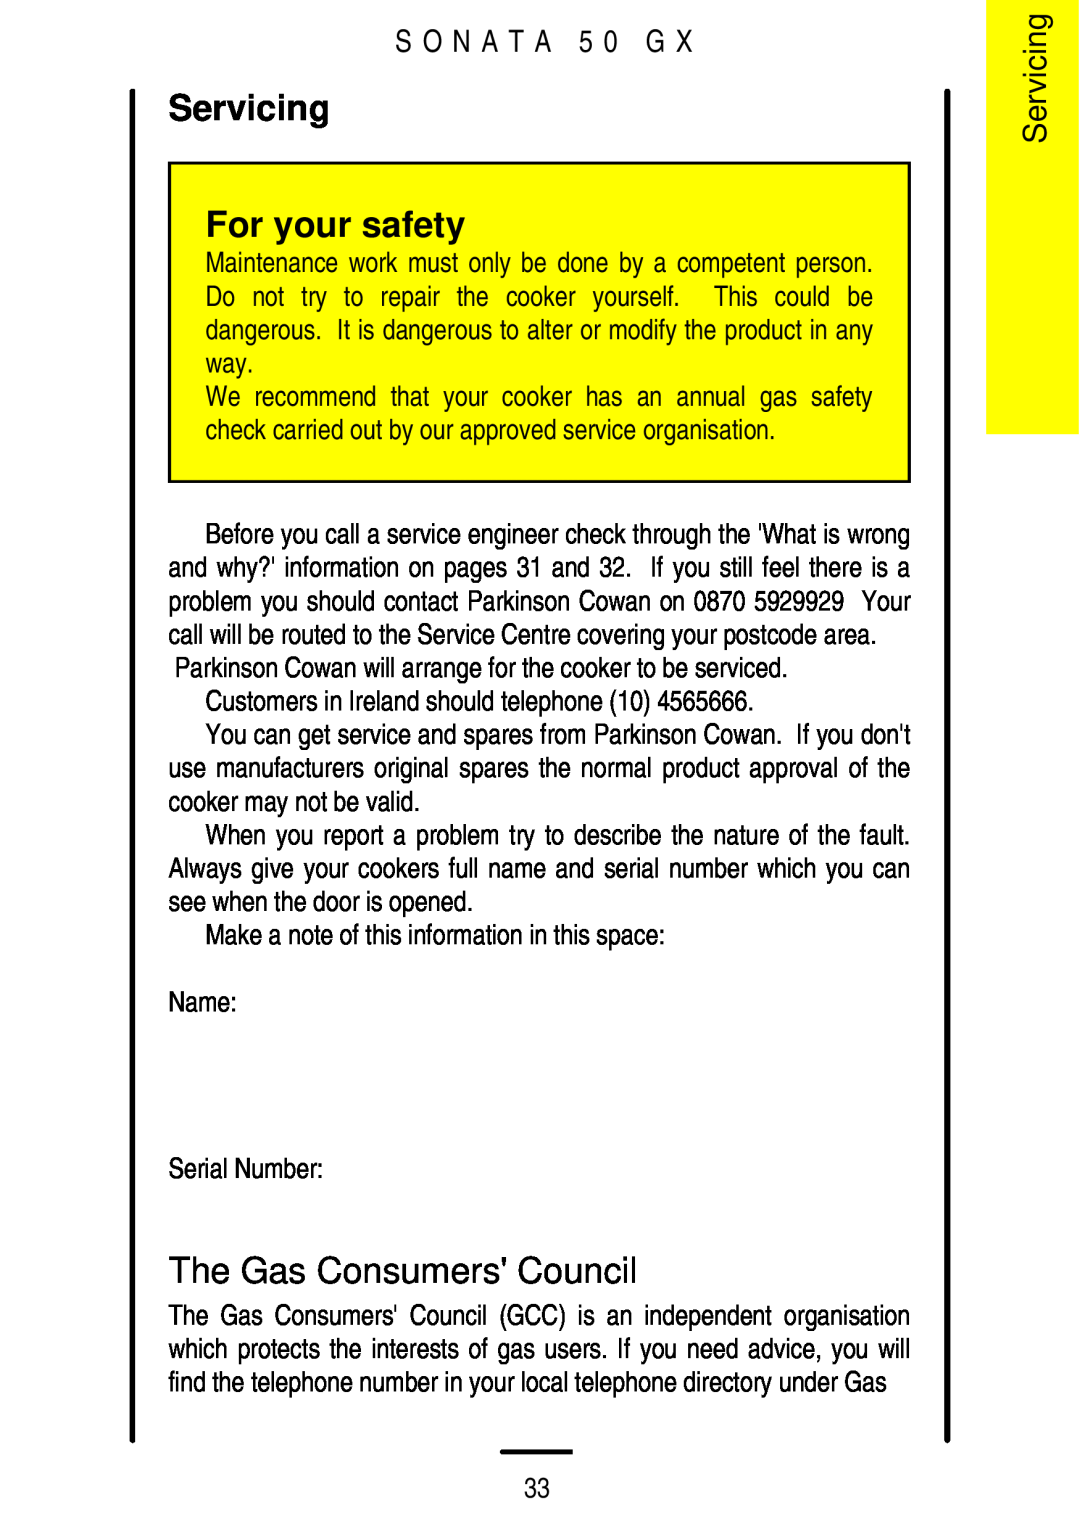 Parkinson Cowan SONATA 50GX installation instructions Servicing For your safety, The Gas Consumers Council 